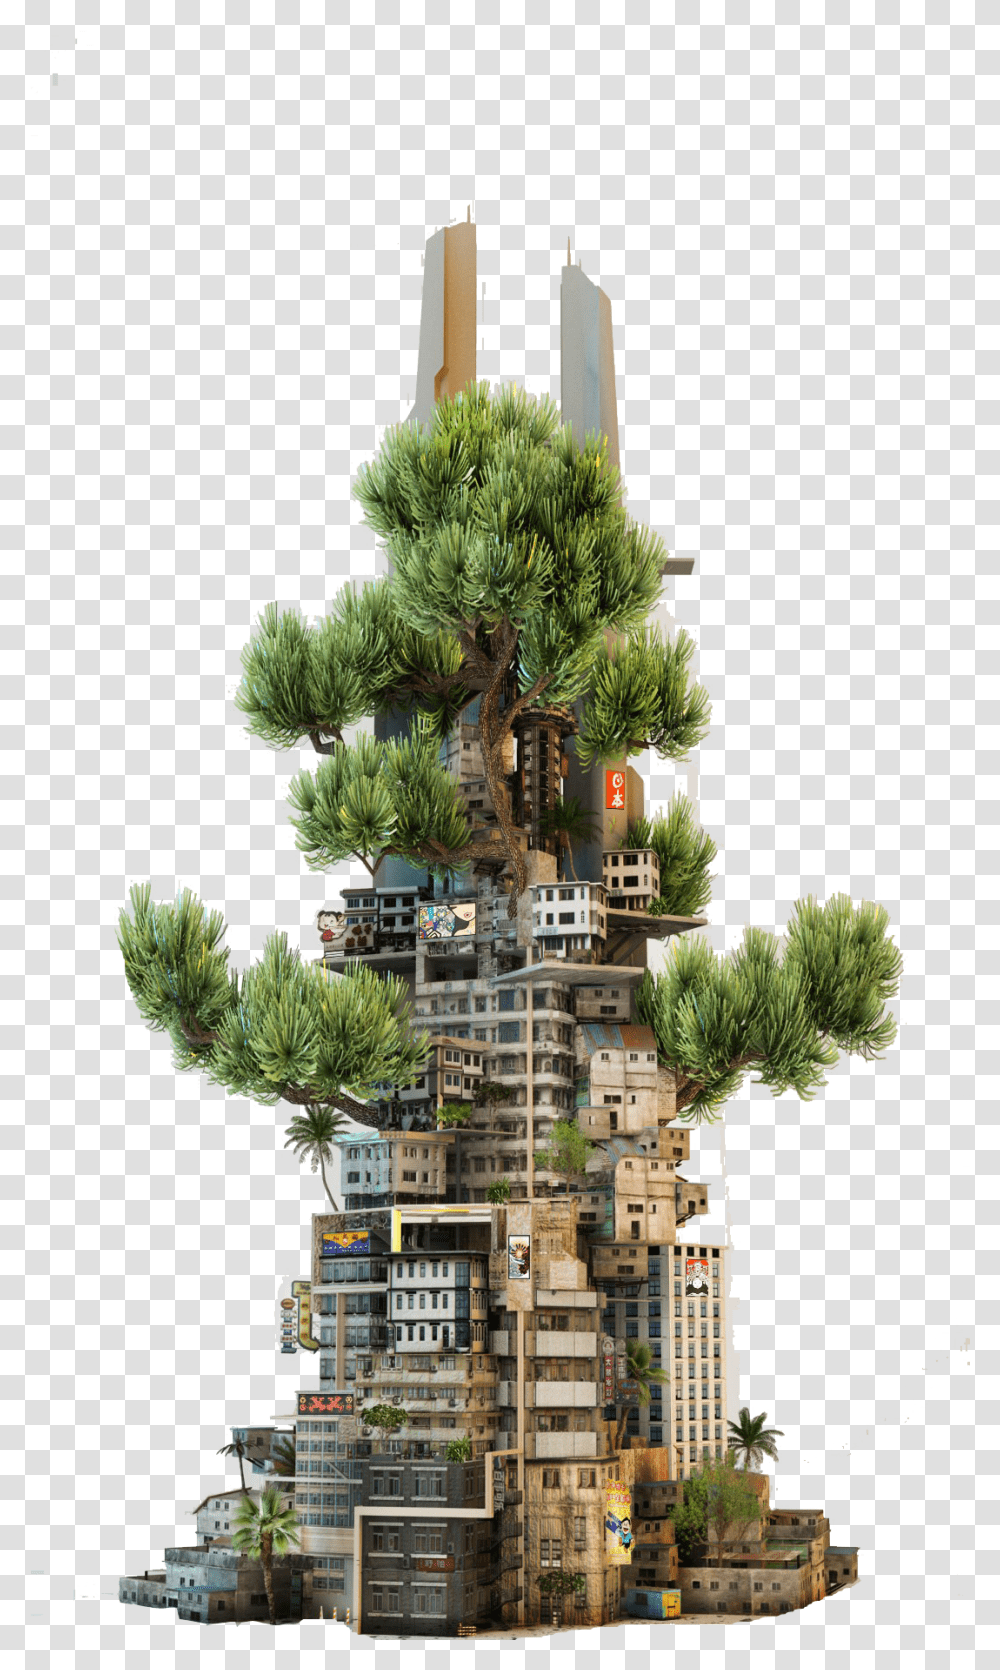 The Growing Building Image Architectural Design 1080, Tree, Plant, Conifer, Housing Transparent Png